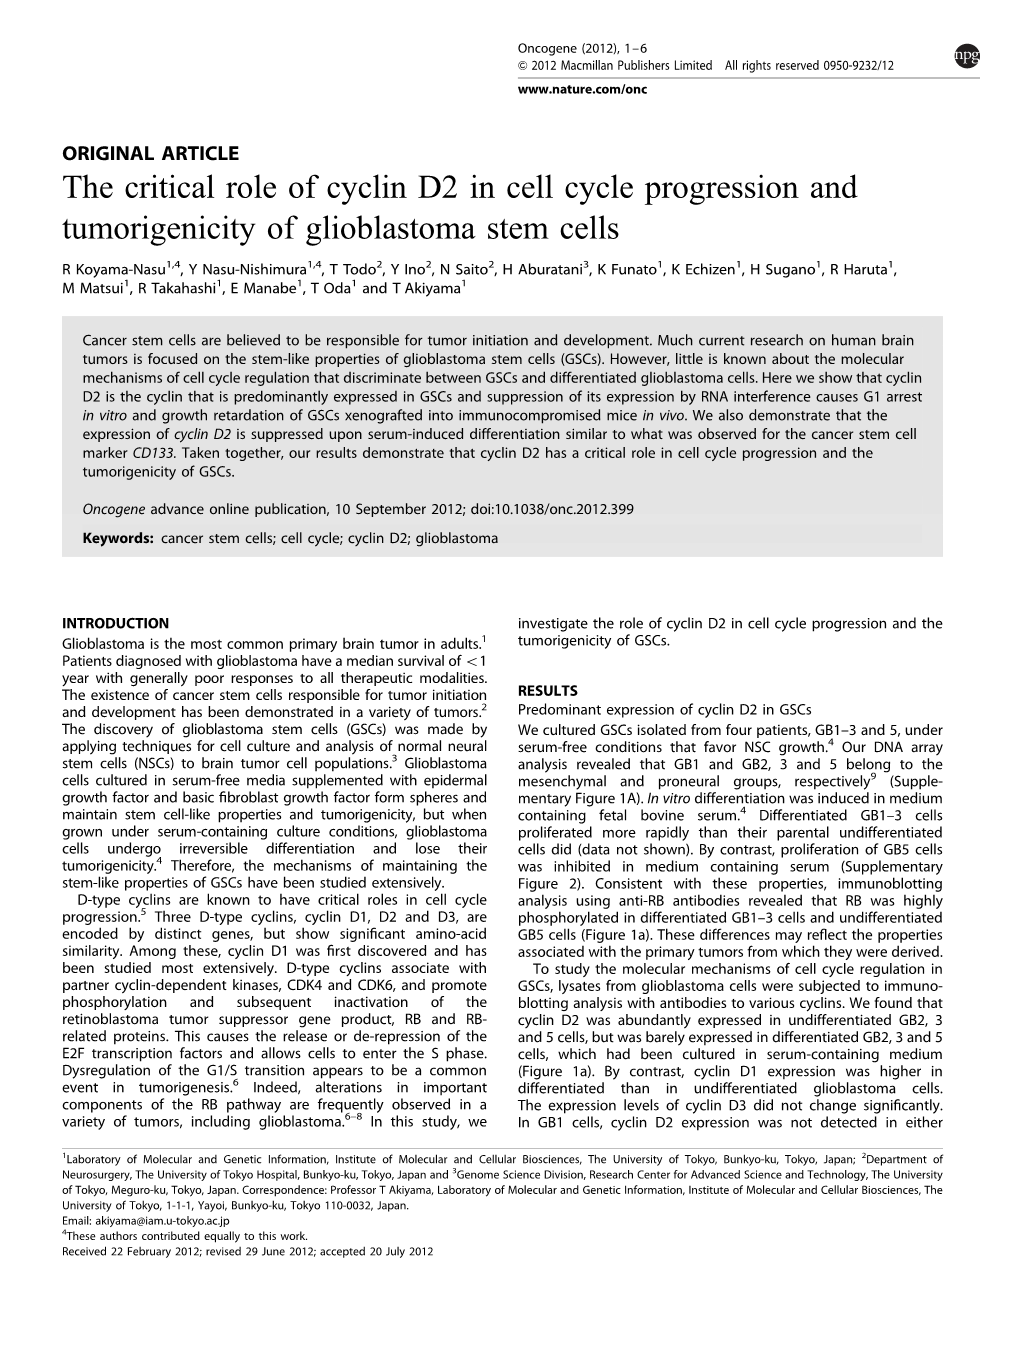 The Critical Role of Cyclin D2 in Cell Cycle Progression and Tumorigenicity of Glioblastoma Stem Cells